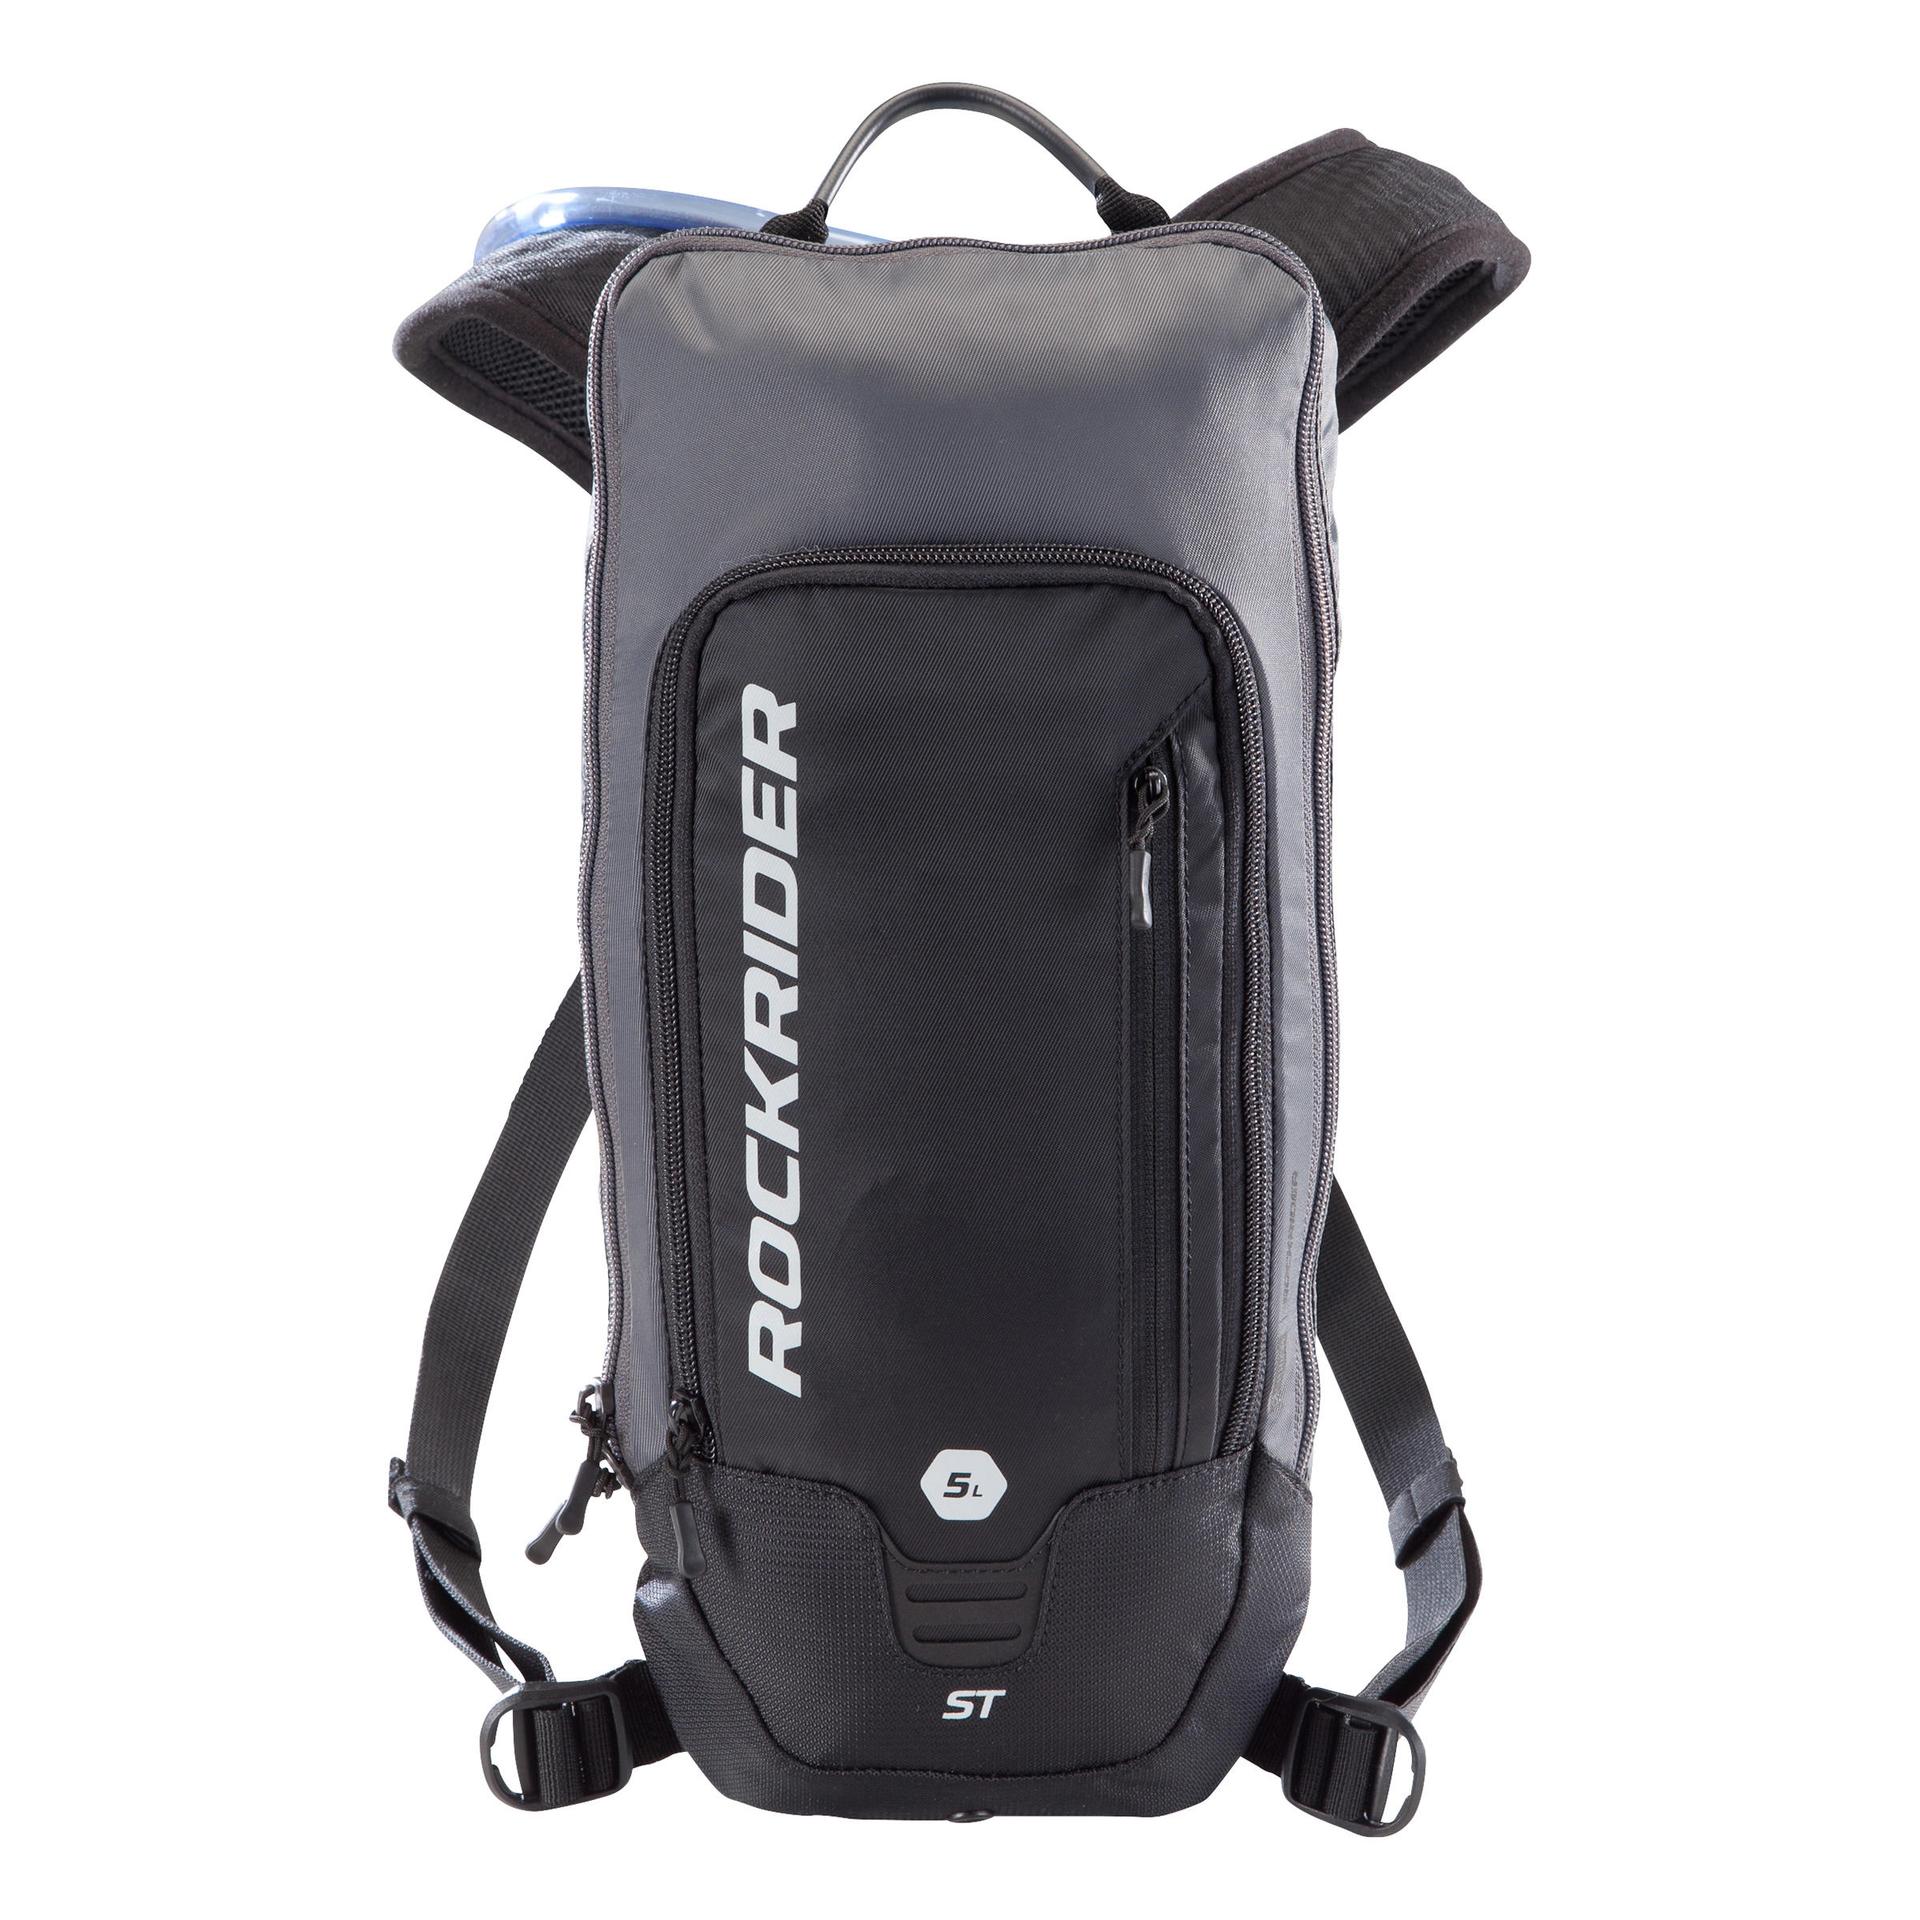 cycle hydration backpack st 500 4l/1l water - black